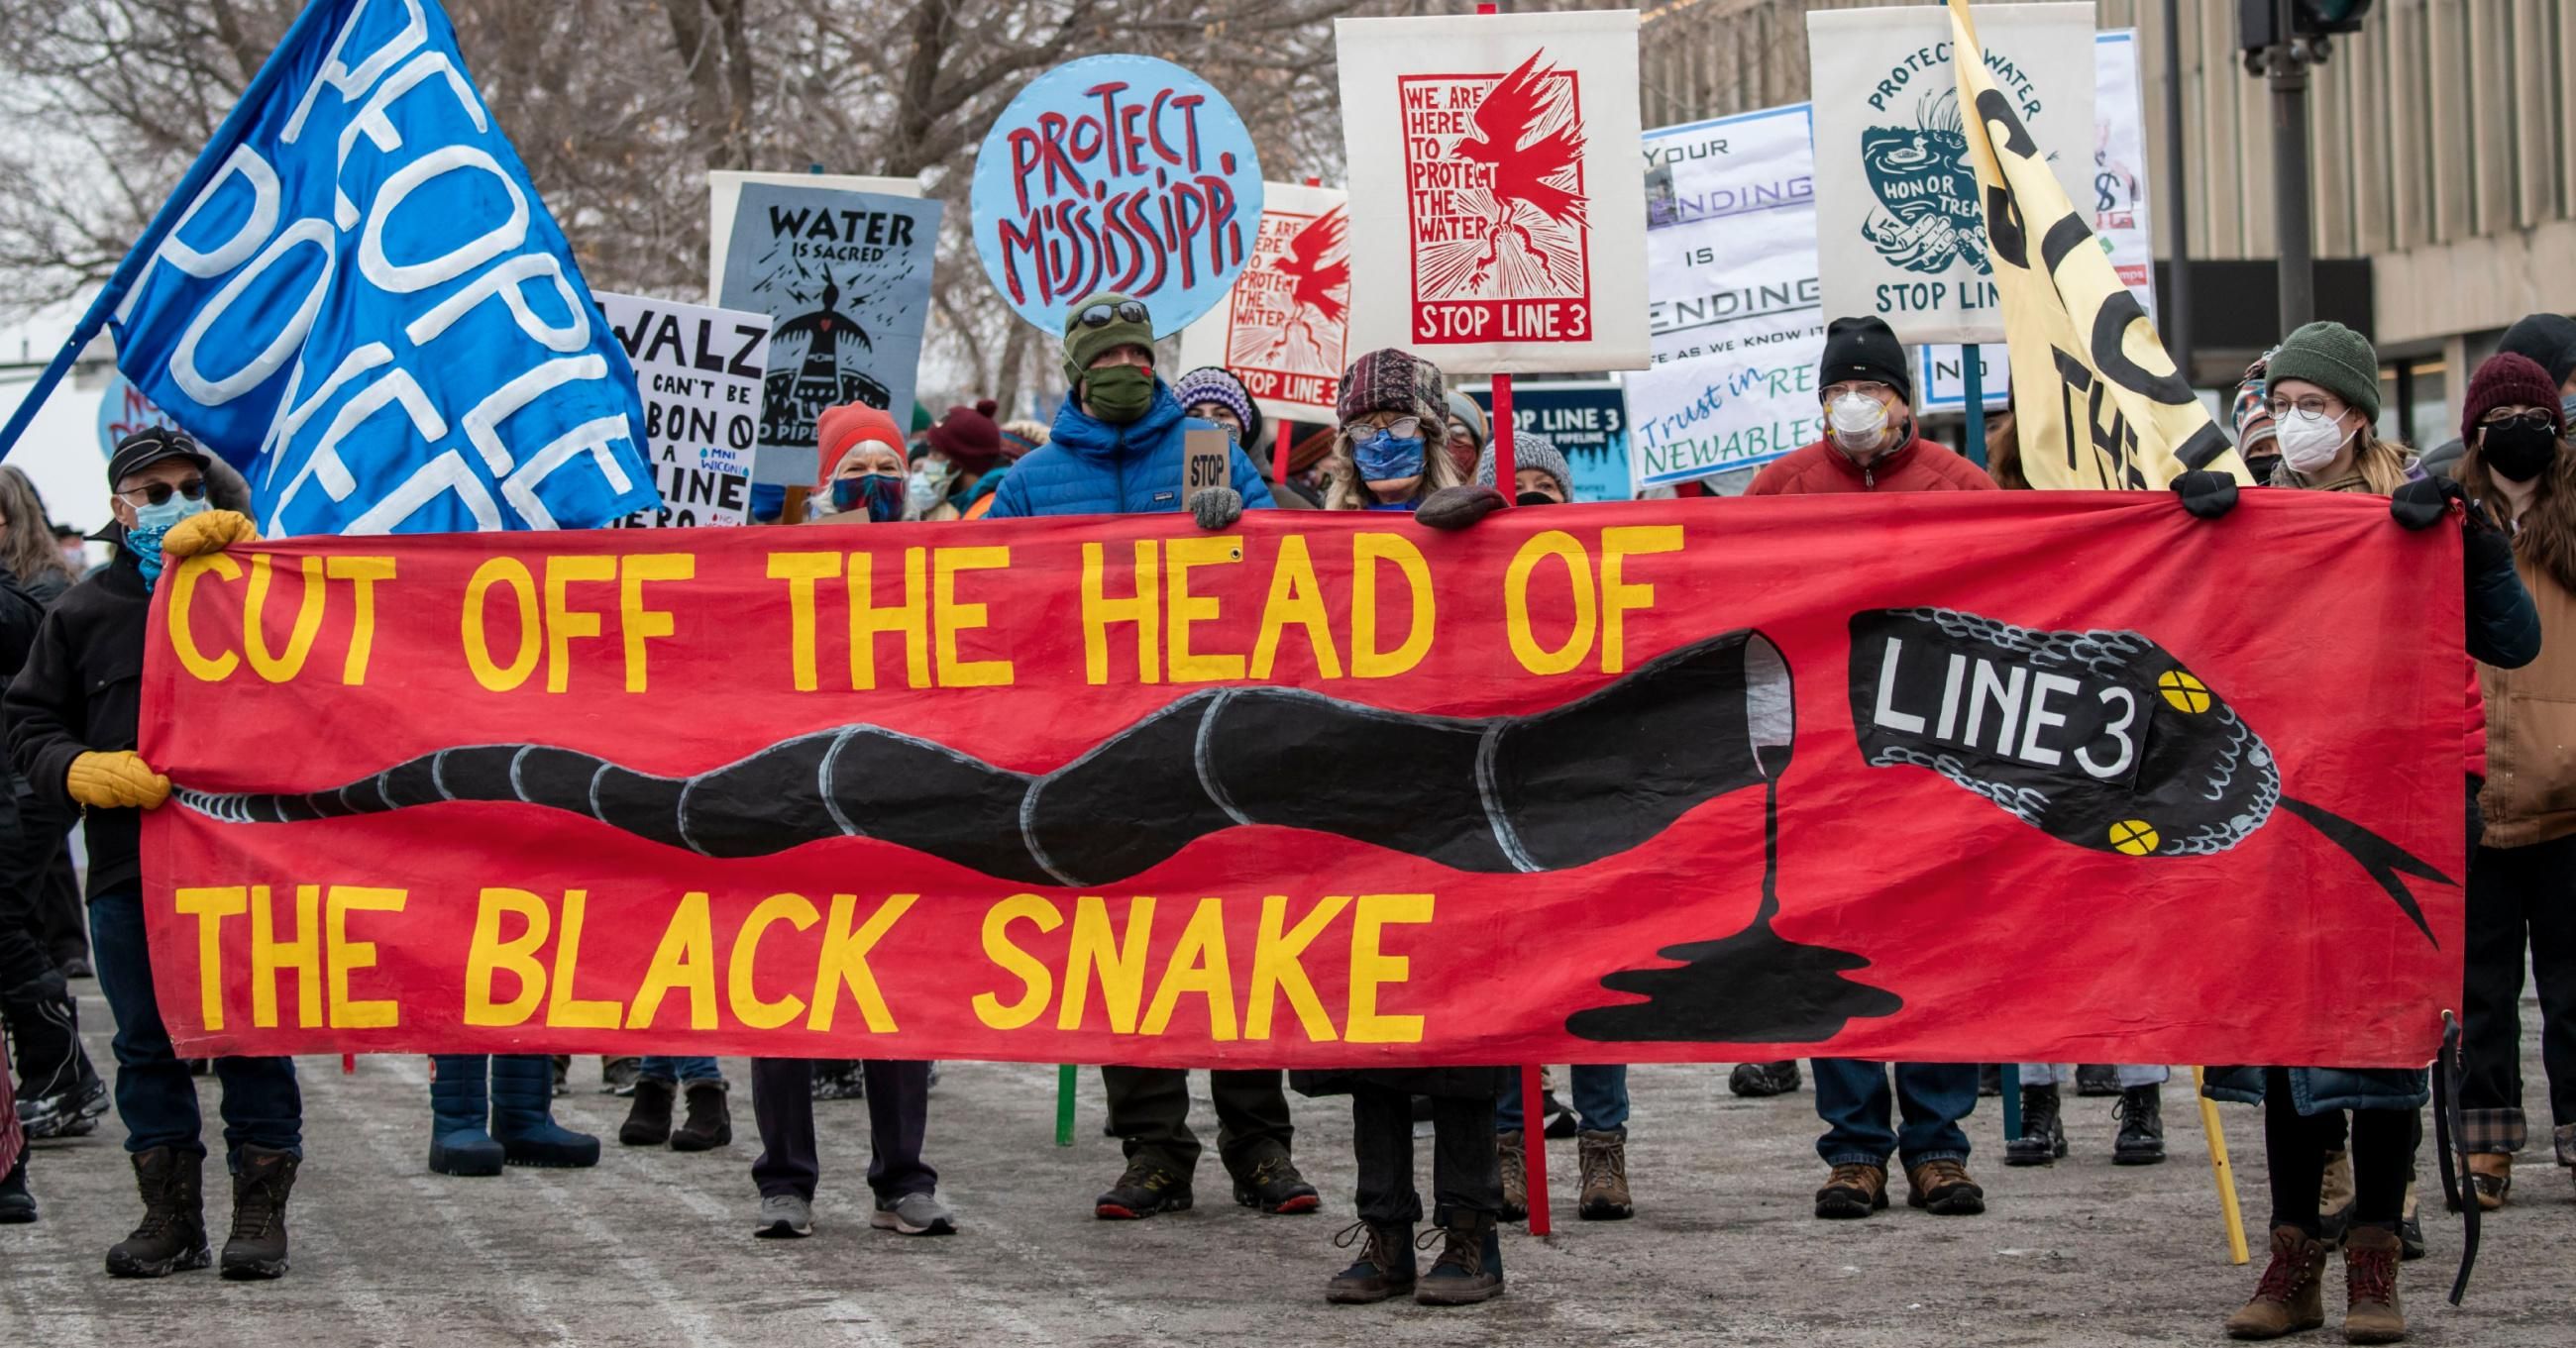 Opponents of the Enbridge Energy Line 3 oil pipeline replacement project protested its construction across northern Minnesota on January 29, 2021(Photo: Michael Siluk/Education Images/Universal Images Group via Getty Images)